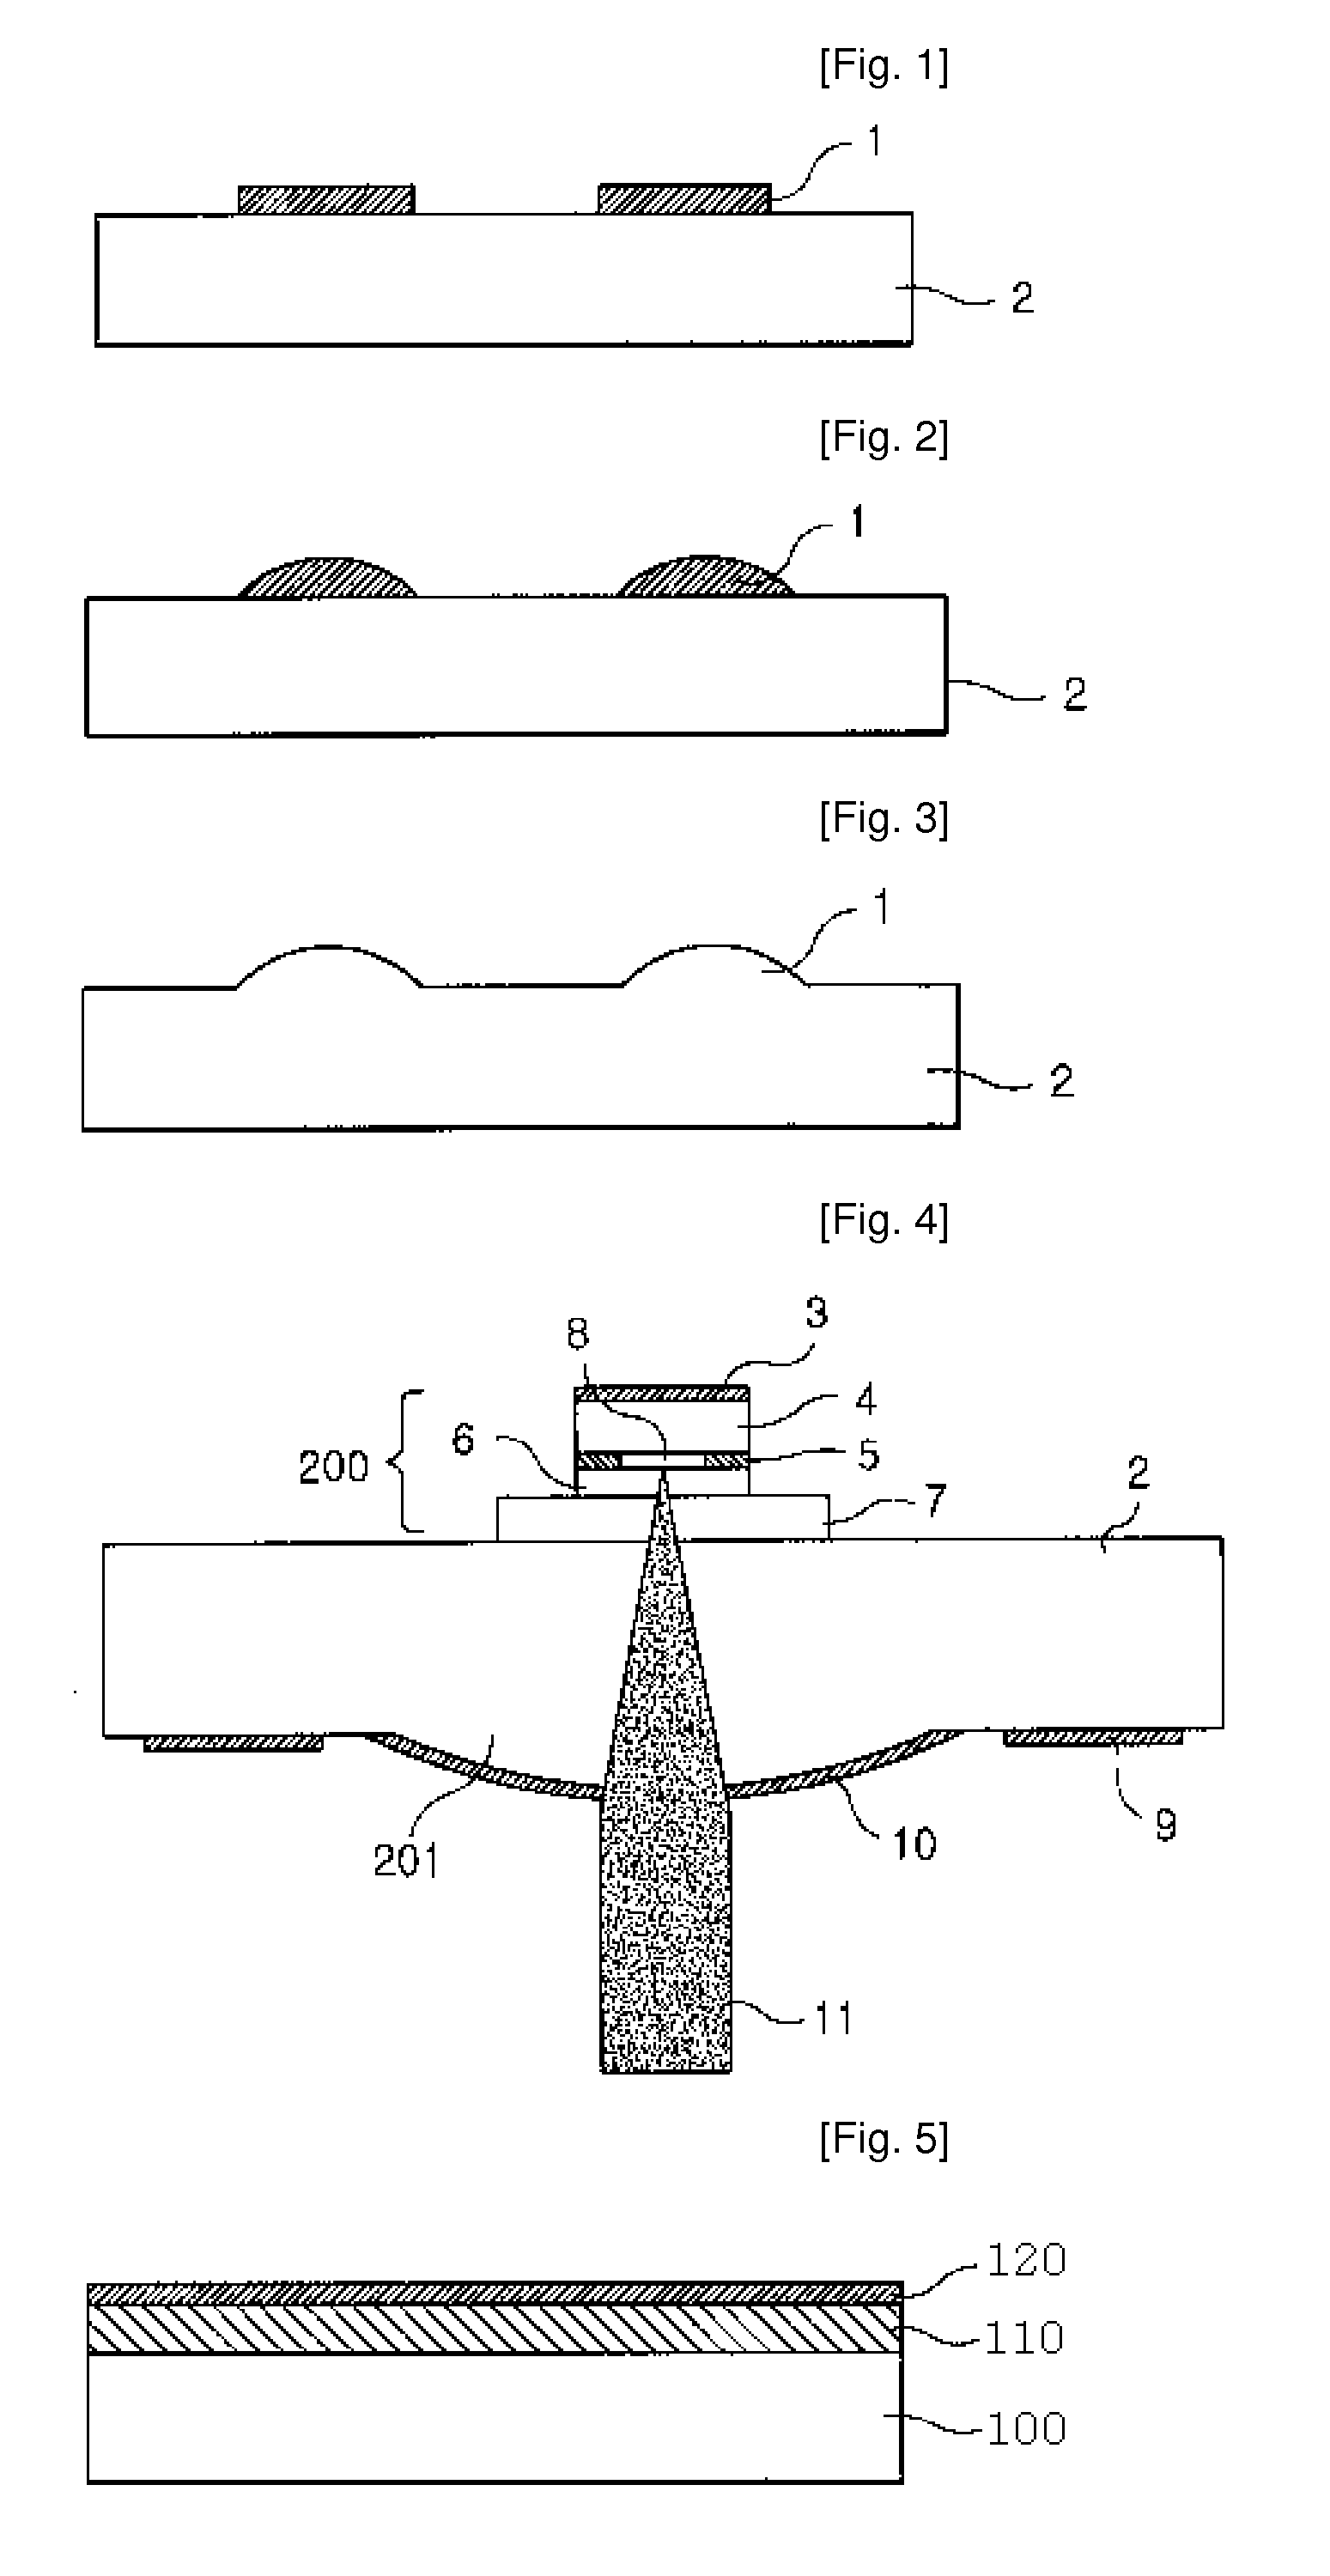 Method for Fabricating Micro-Lens and Micro-Lens Integrated Optoelectronic Devices Using Selective Etch of Compound Semiconductor